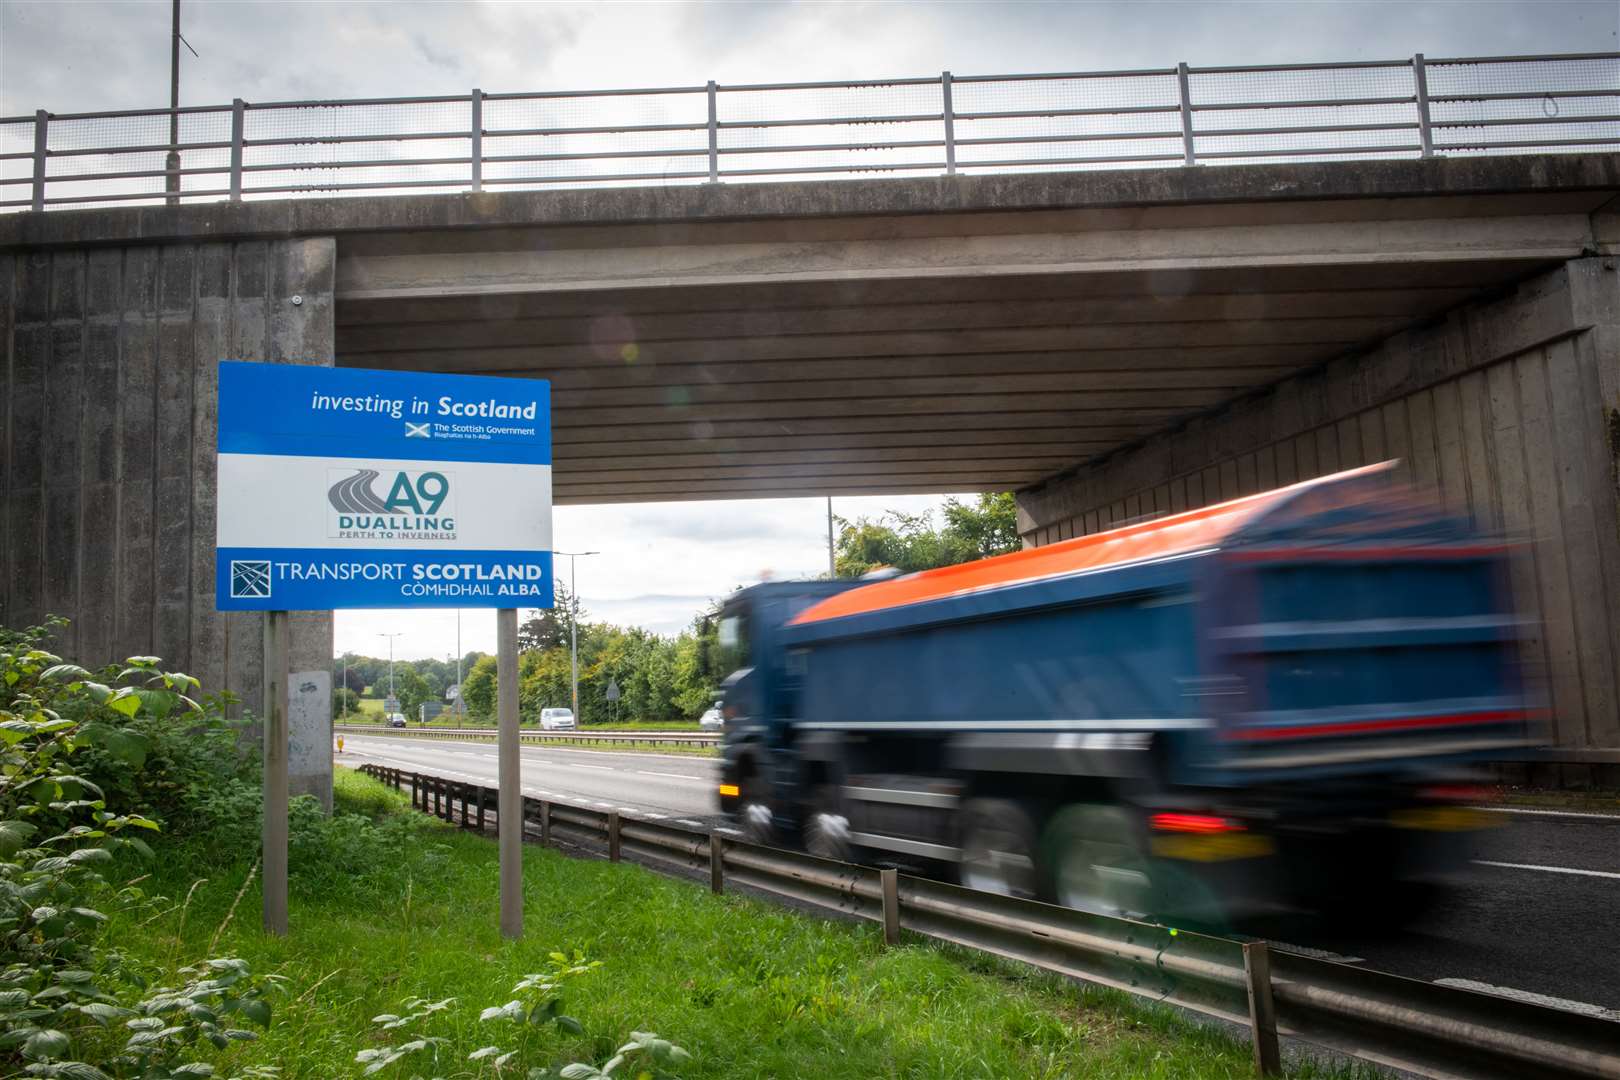 Would altering speed limit laws for lorries make a positive difference?